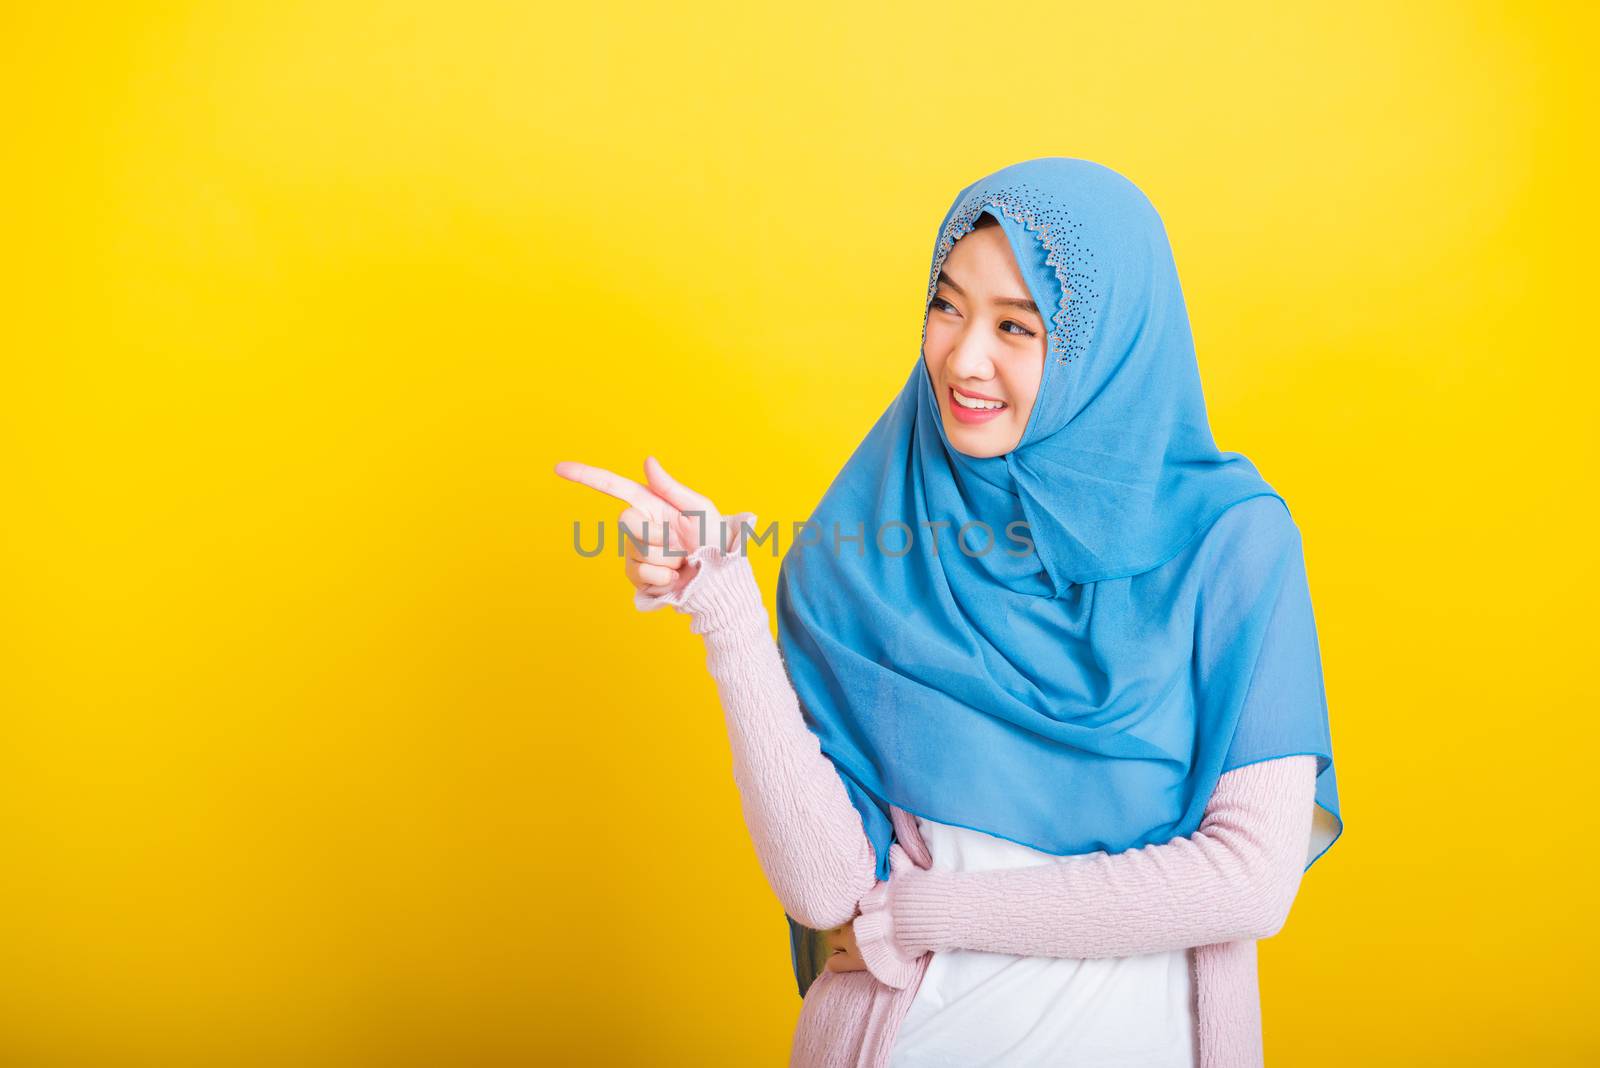 Asian Muslim Arab, Portrait of happy beautiful young woman Islam religious wear veil hijab funny smile she positive expression pointing finger side sideways to space isolated yellow background